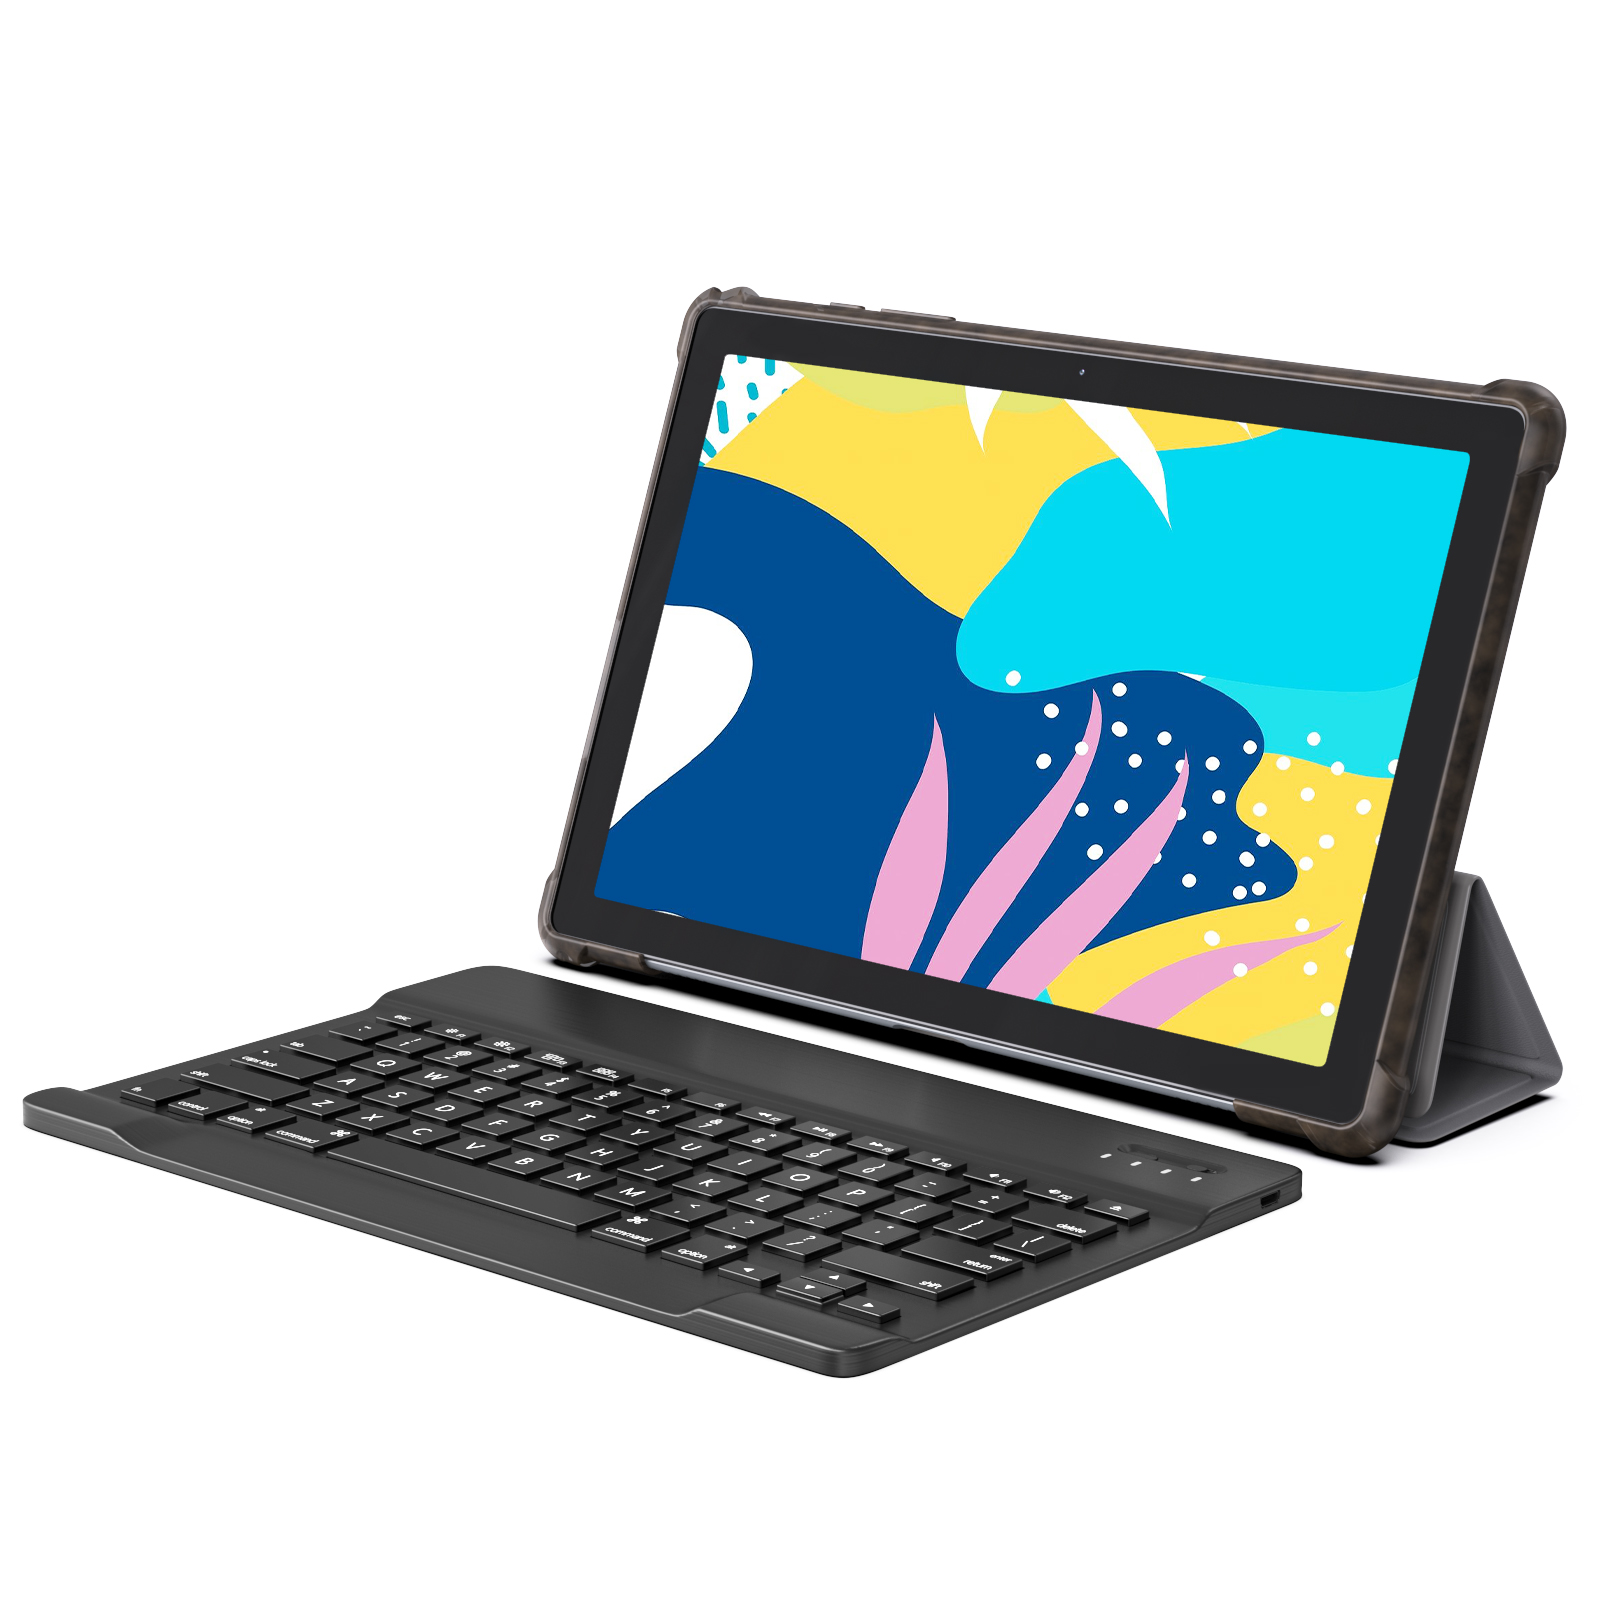 YOTOPT U221 Tablet, 10 Inch Android 11 Tablet with Tablet Case, Keyboard, and More